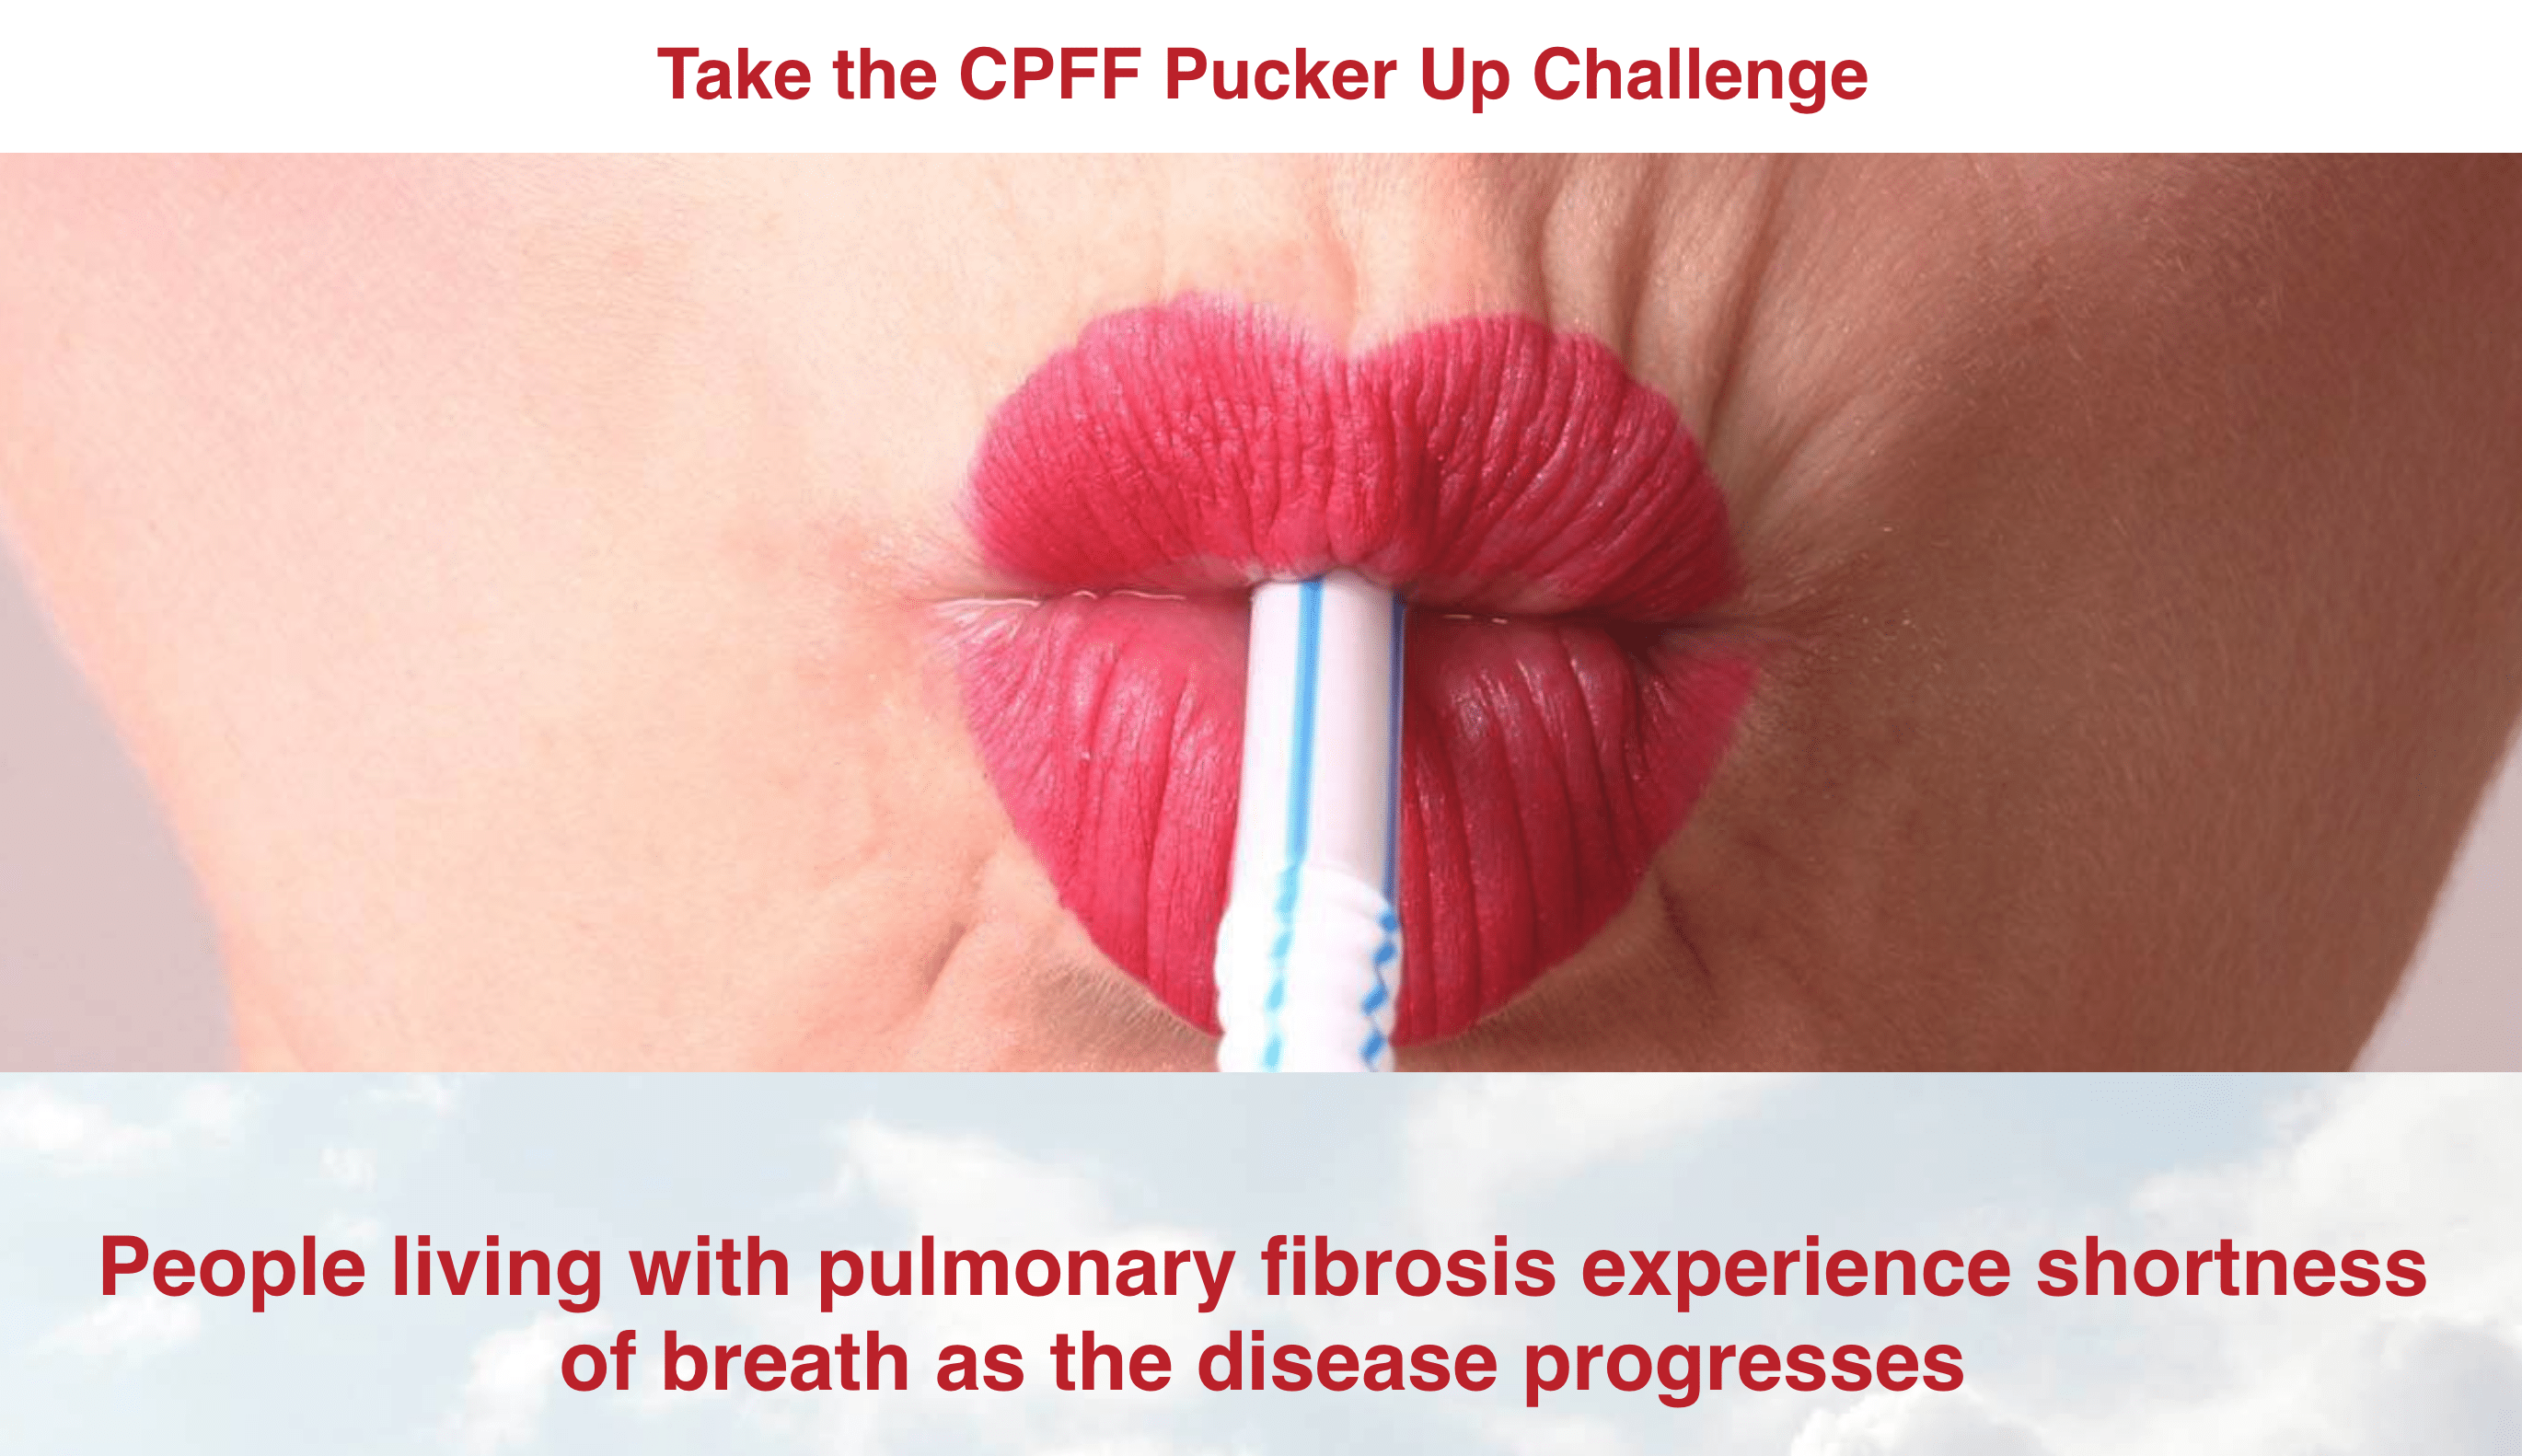 Take the Pucker Up Challenge